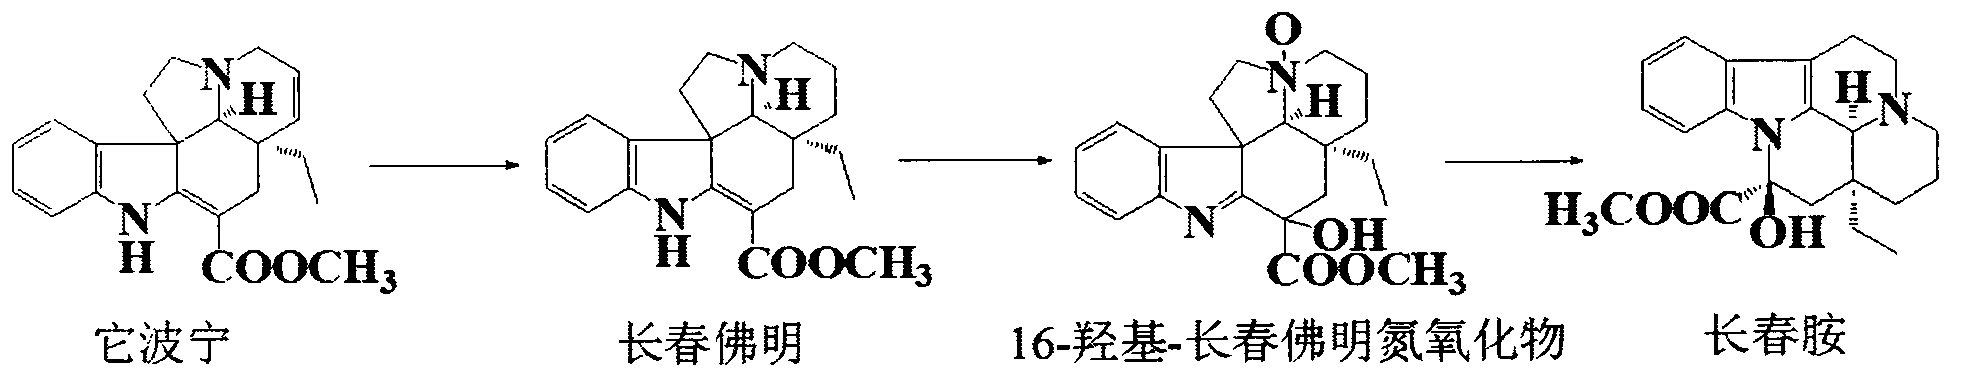 Industrialized semi-synthesis process of vincamine